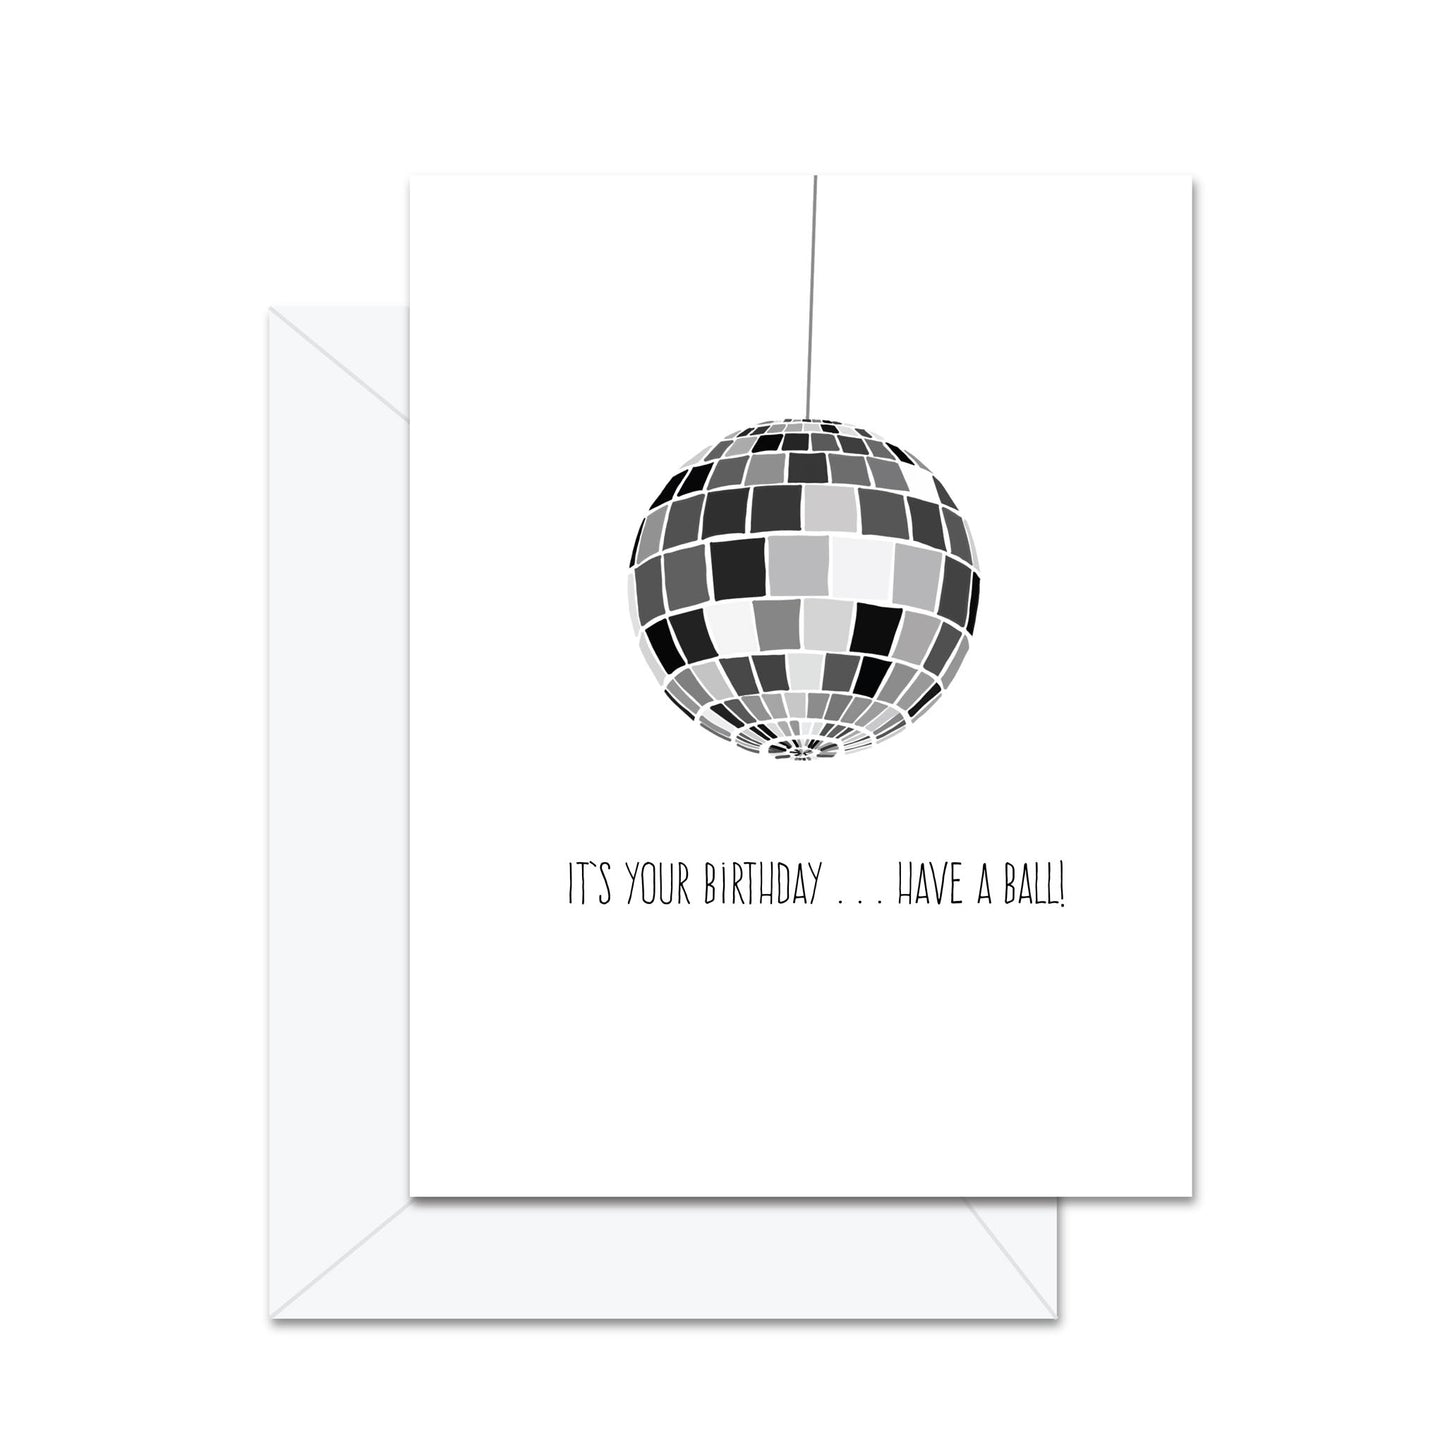 It's Your Birthday . . . Have A Ball! - Greeting Card